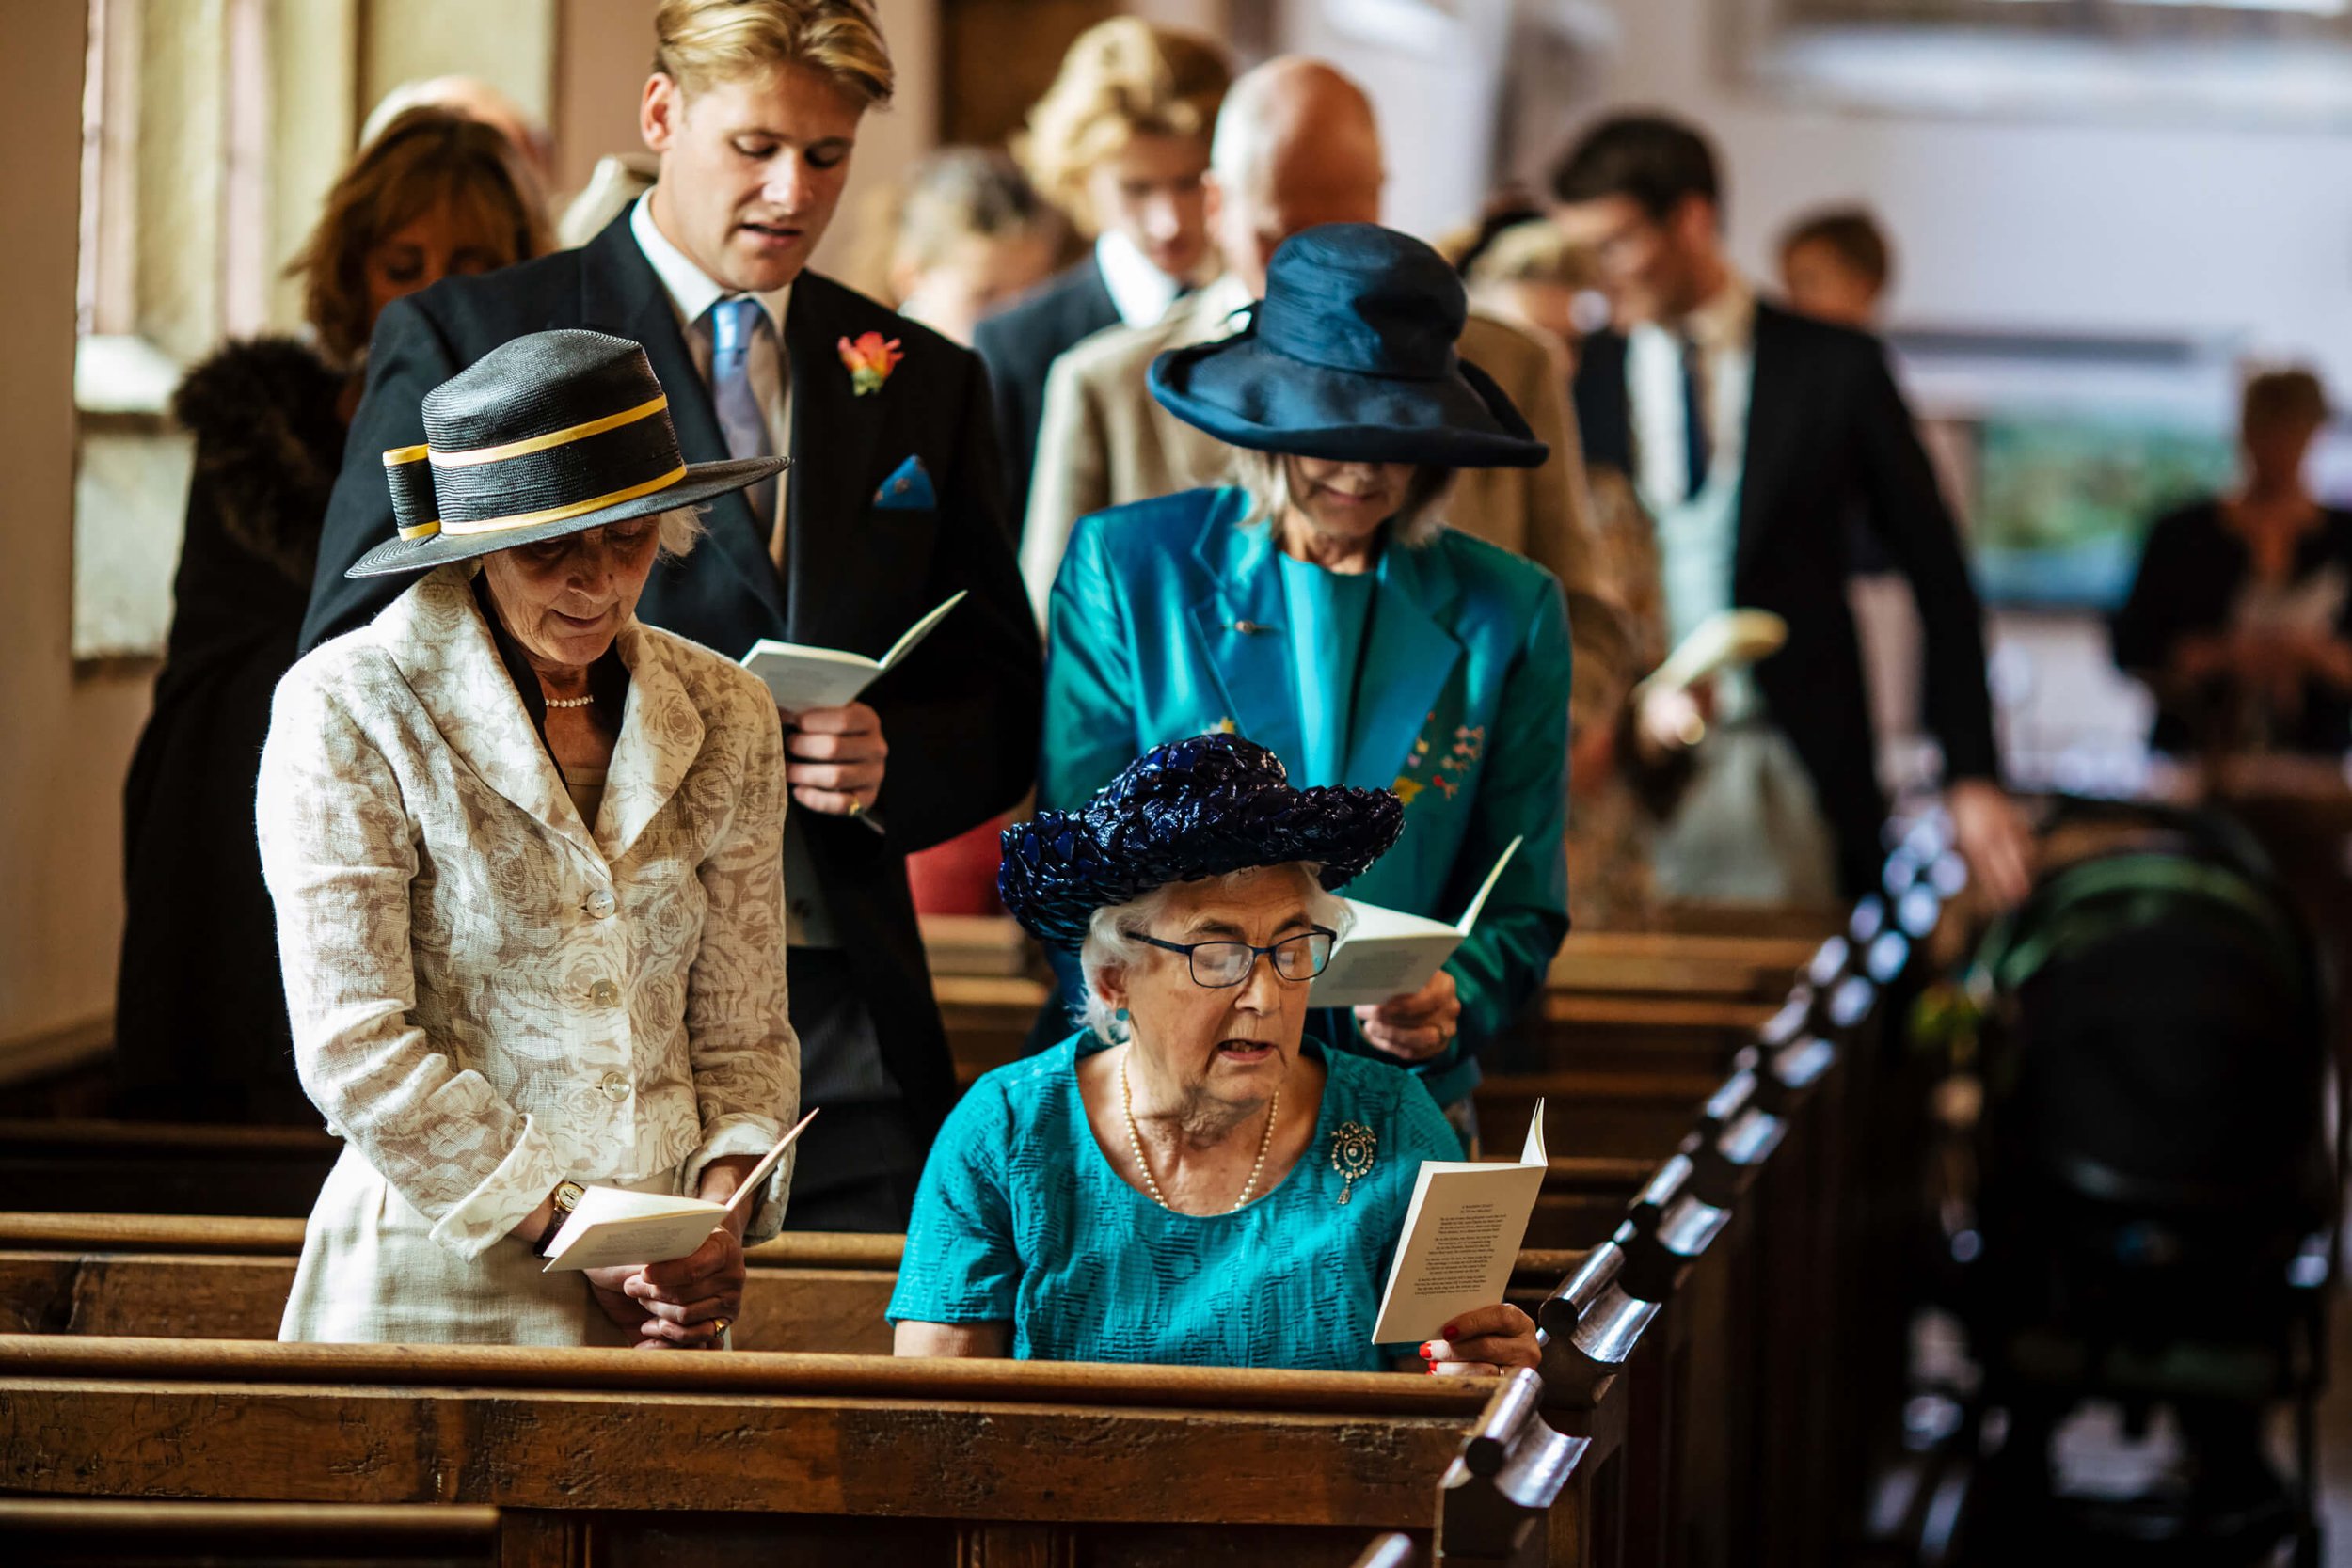 Wedding guests singing hymns in Burnsall